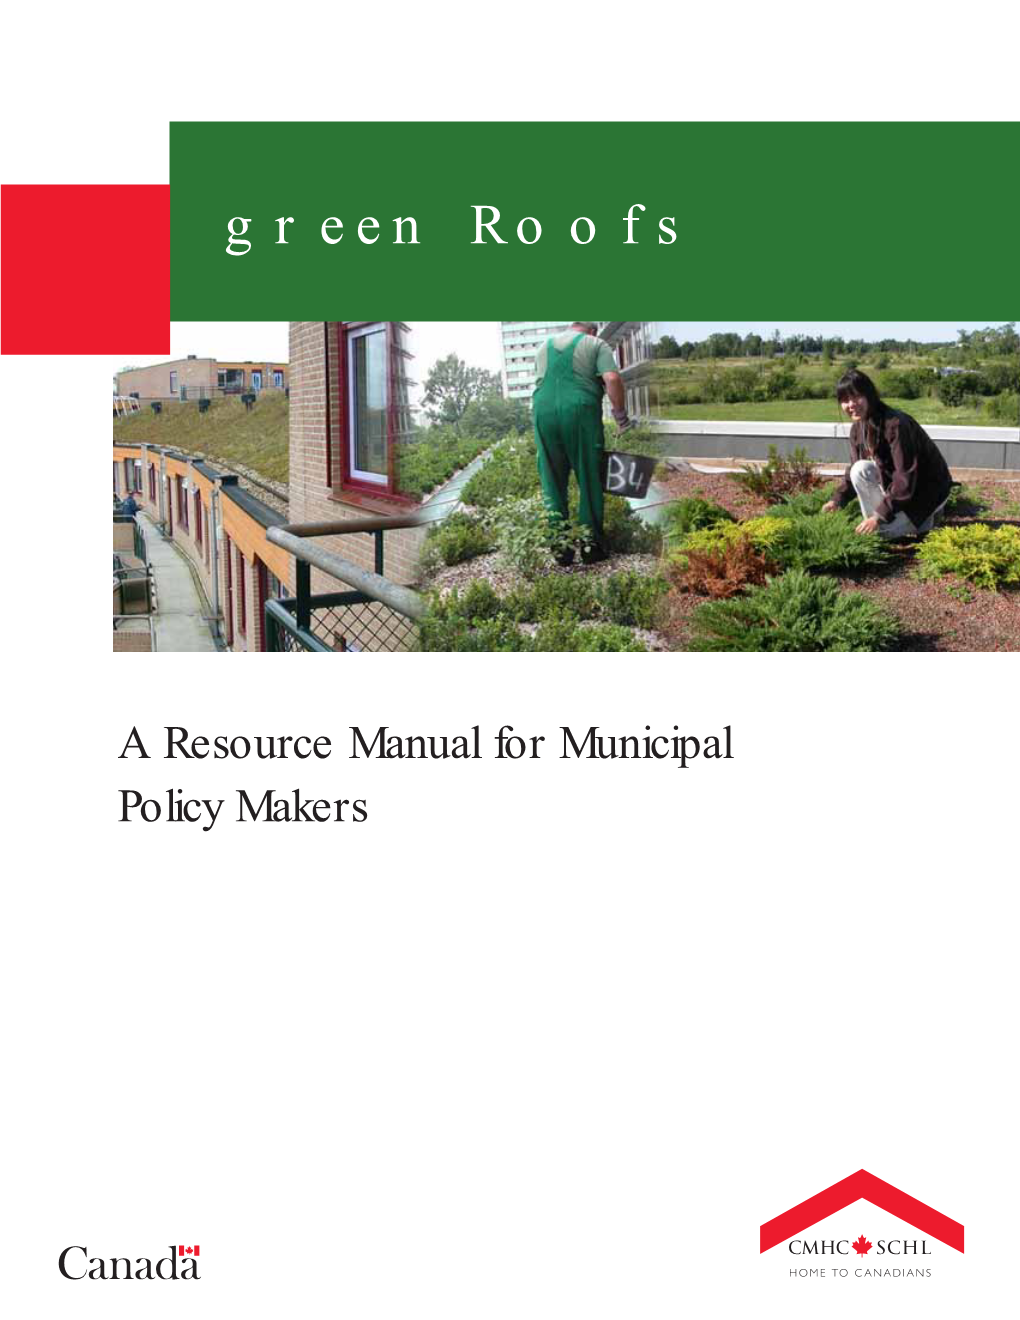 Green Roofs: a Resource Manual for Municipal Policy Makers